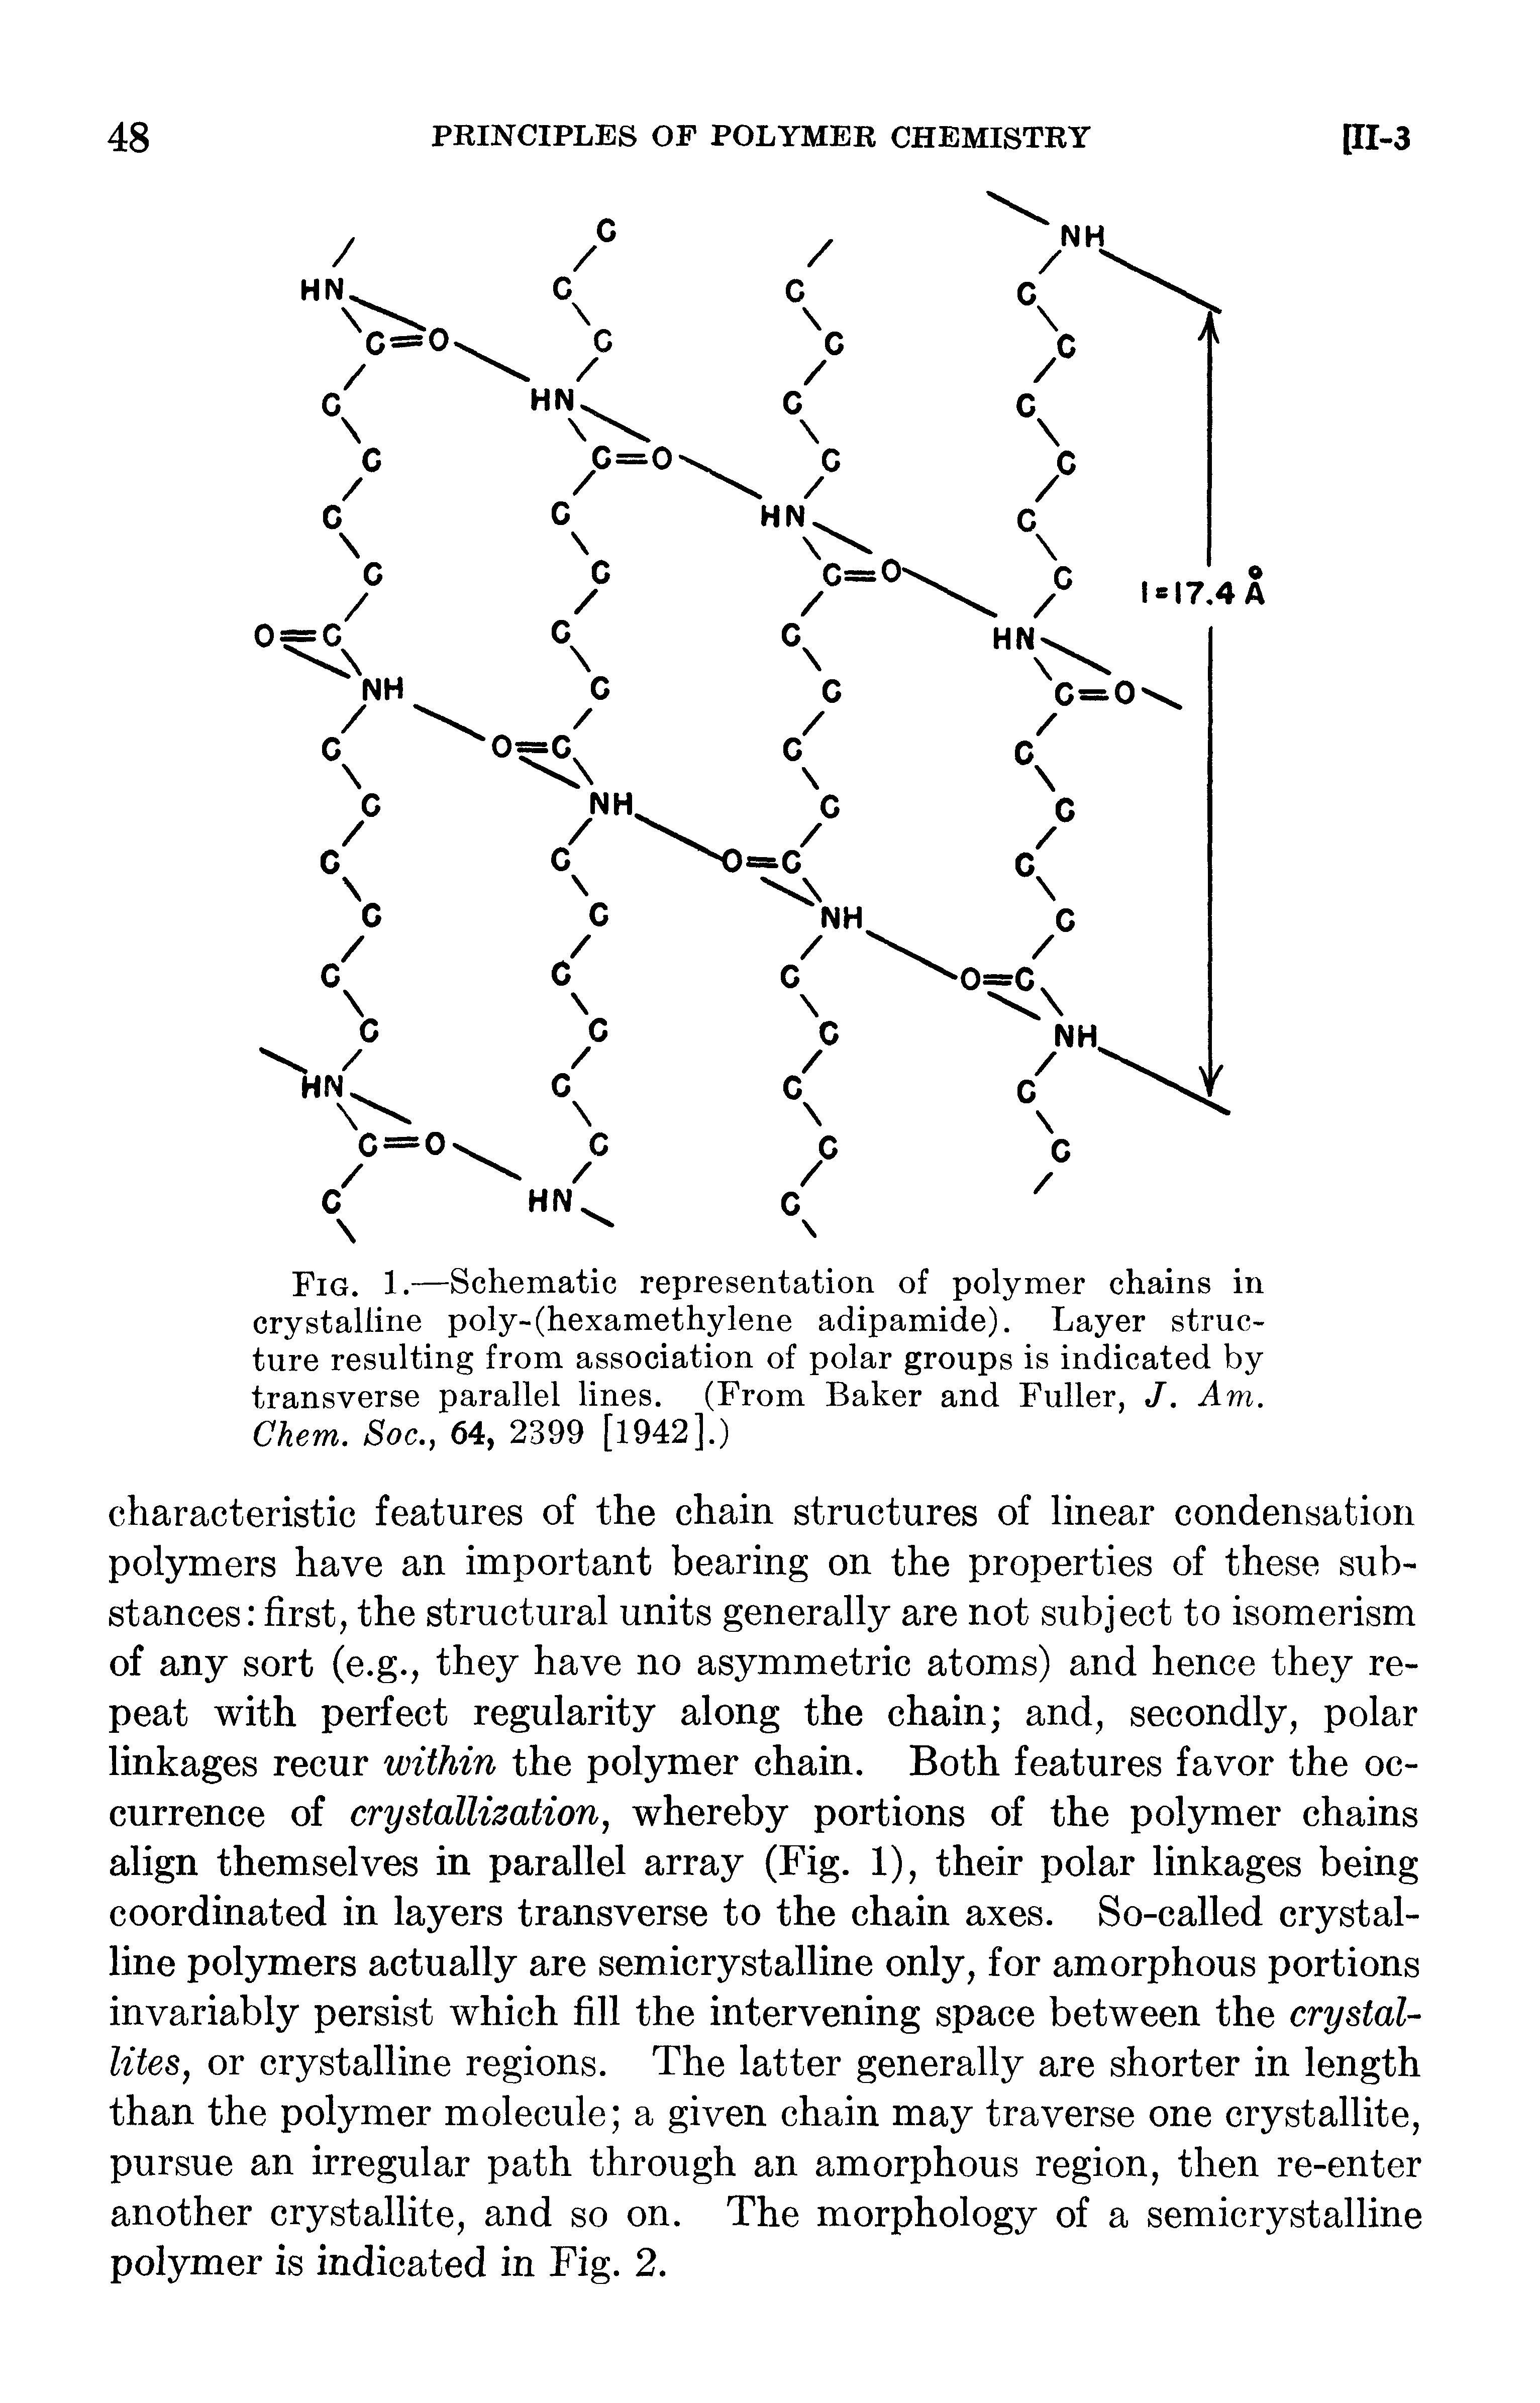 Fig. 1.—Schematic representation of polymer chains in crystalline poly-(hexamethylene adipamide). Layer structure resulting from association of polar groups is indicated by transverse parallel lines. (From Baker and Fuller, J. Am.